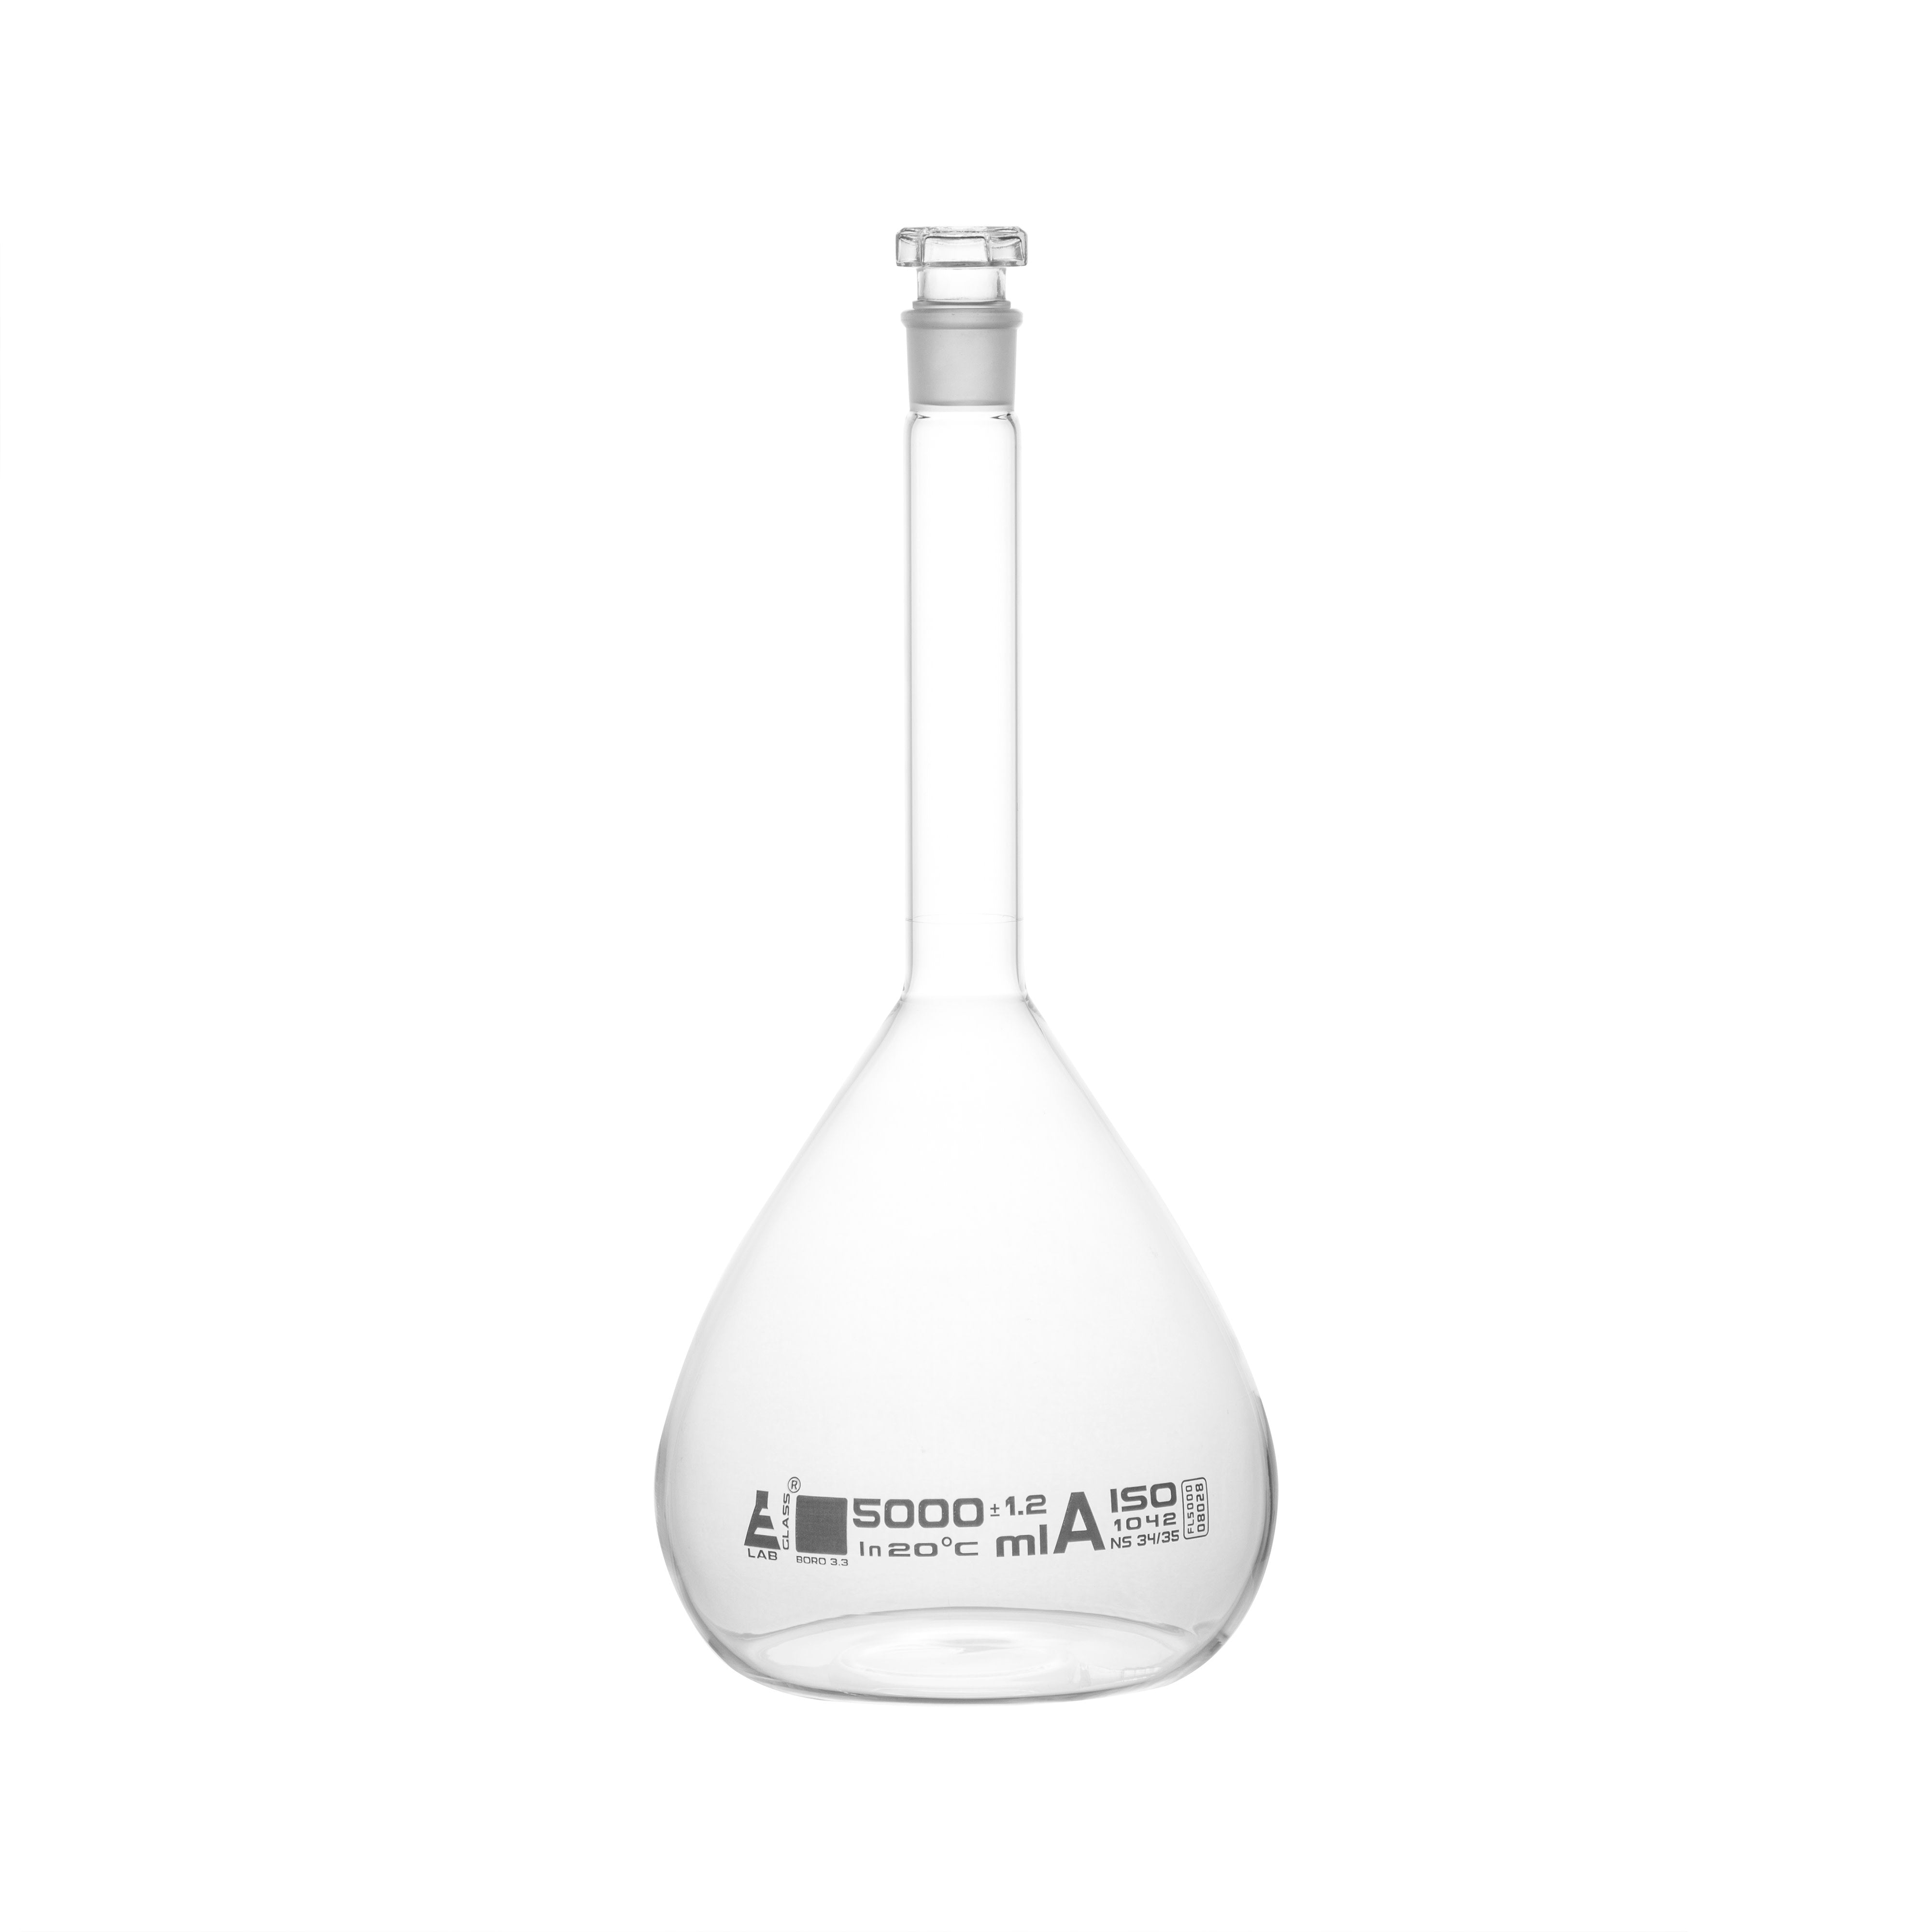 Borosilicate Volumetric Flask with Hollow Glass Stopper, 5000ml, Class A, White Print, Autoclavable